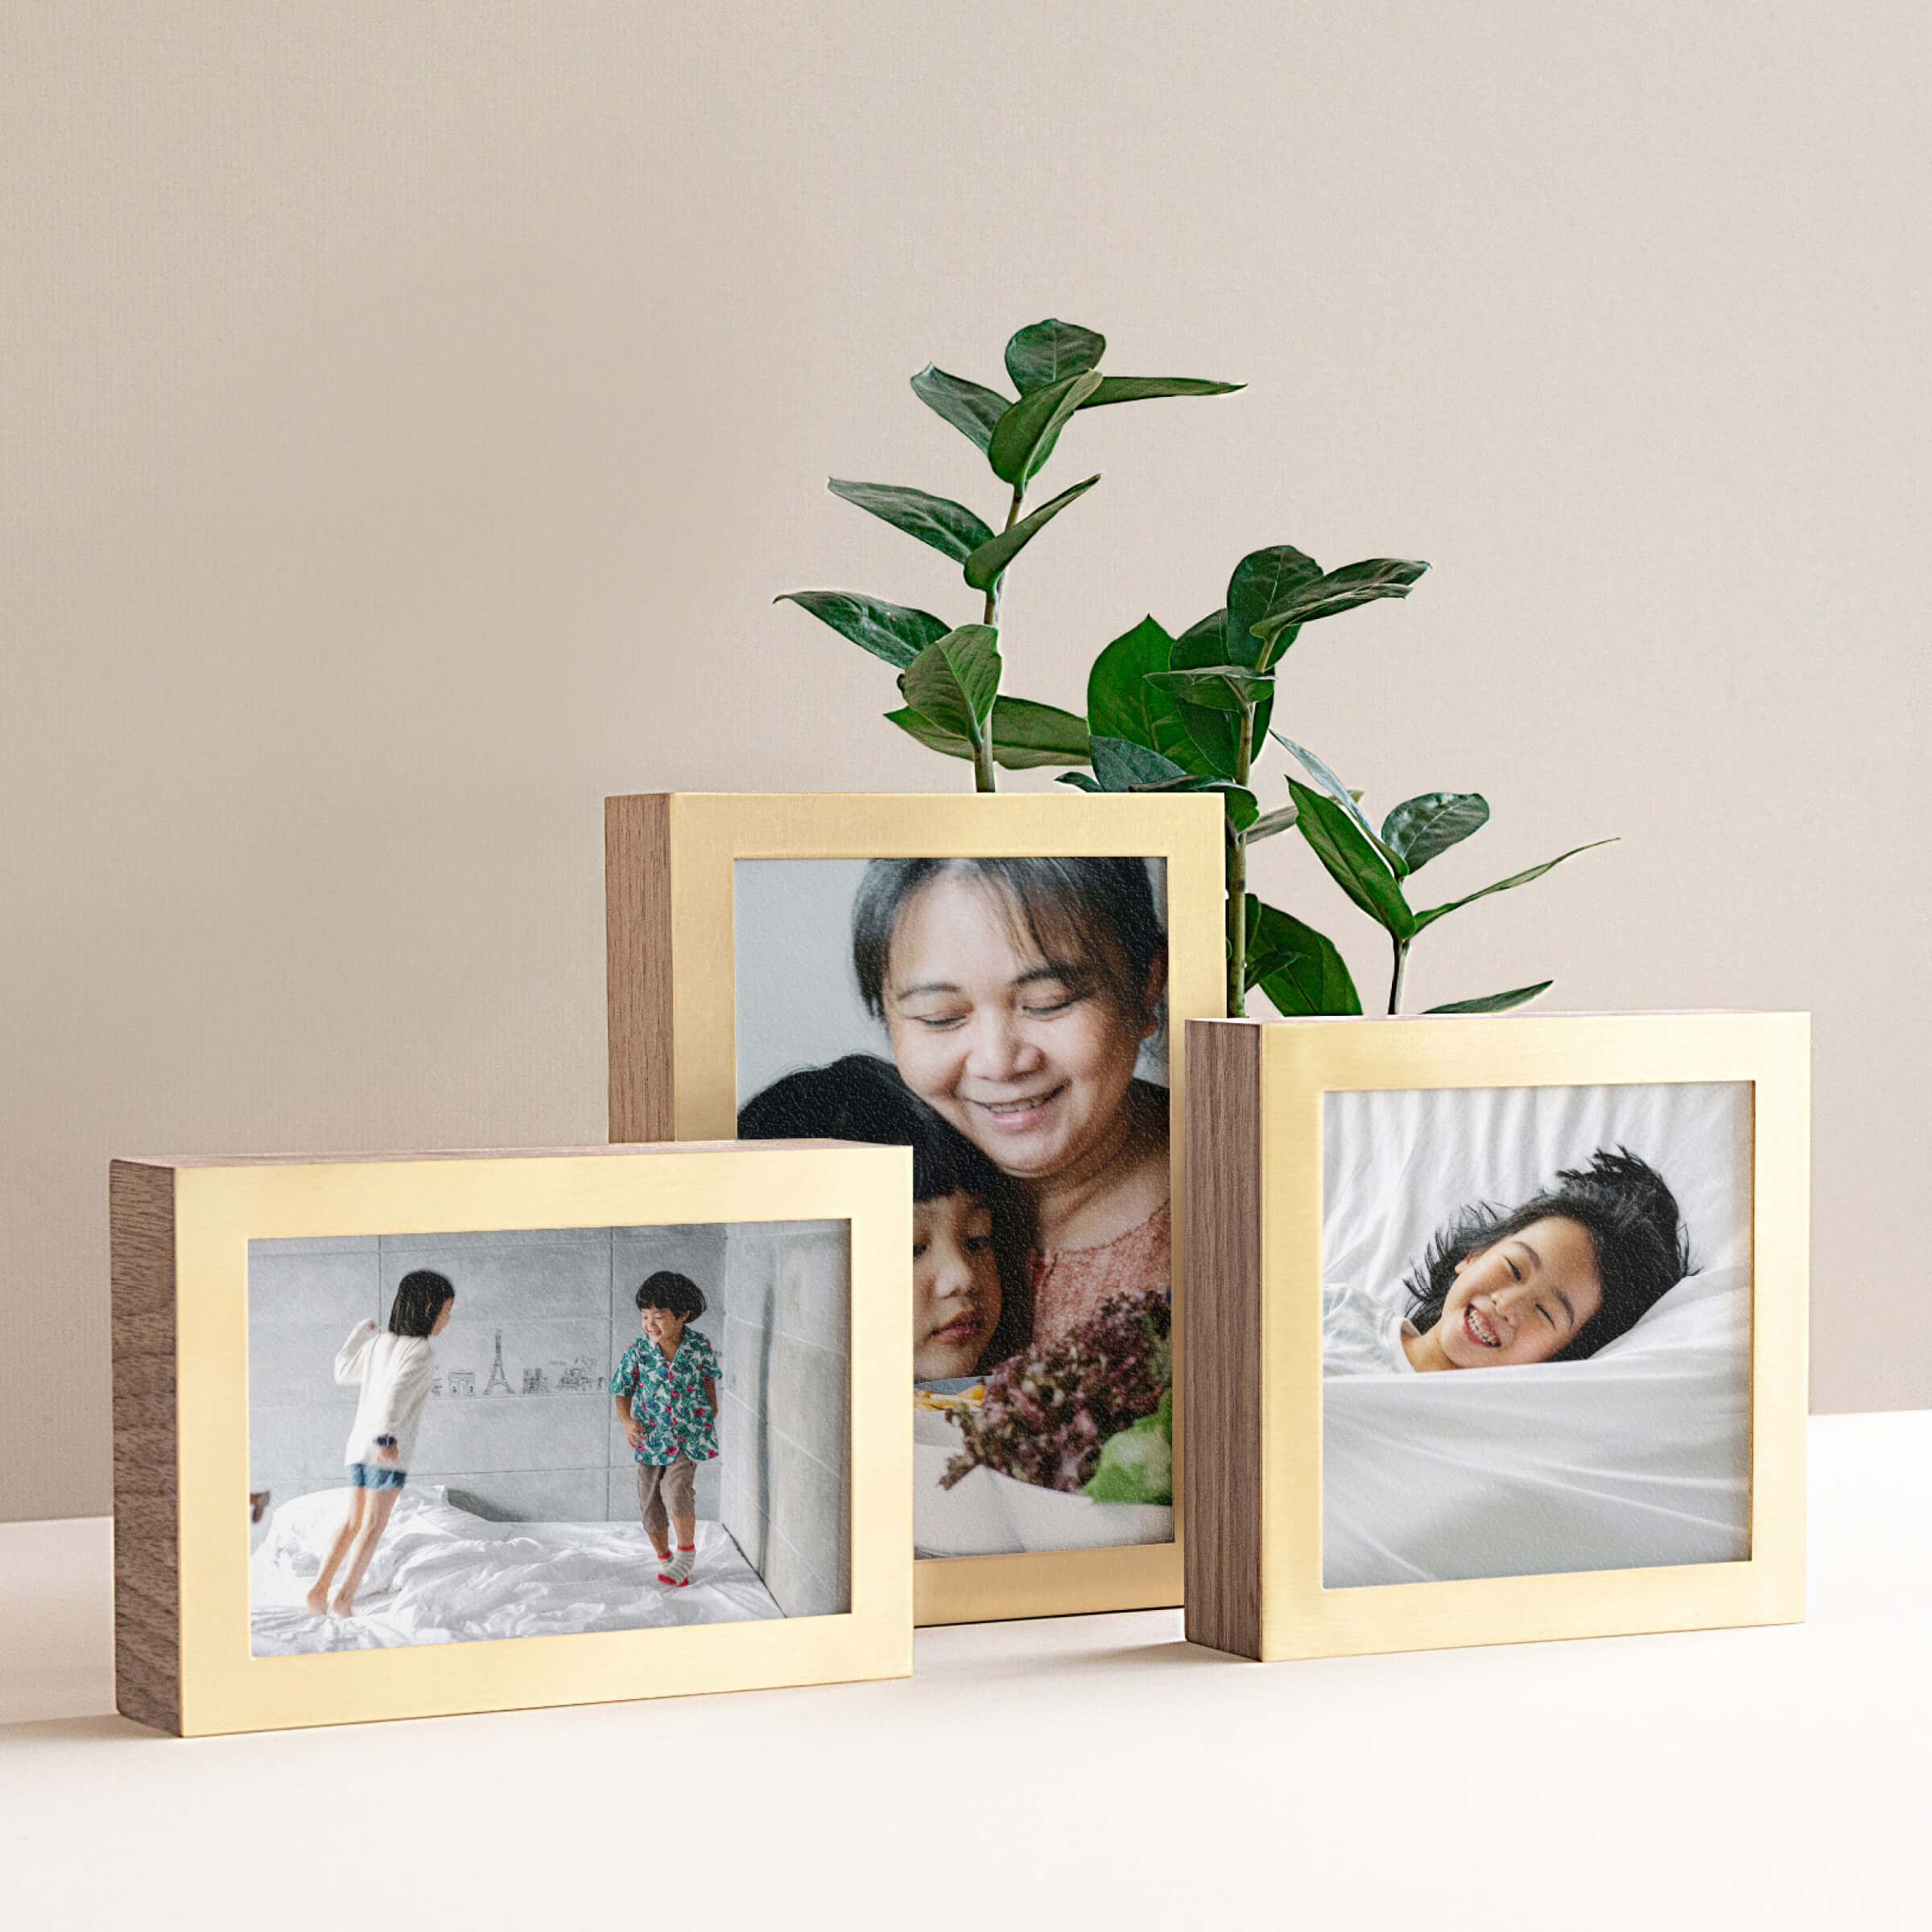 Brass & Wood Display boxes with photo prints inside